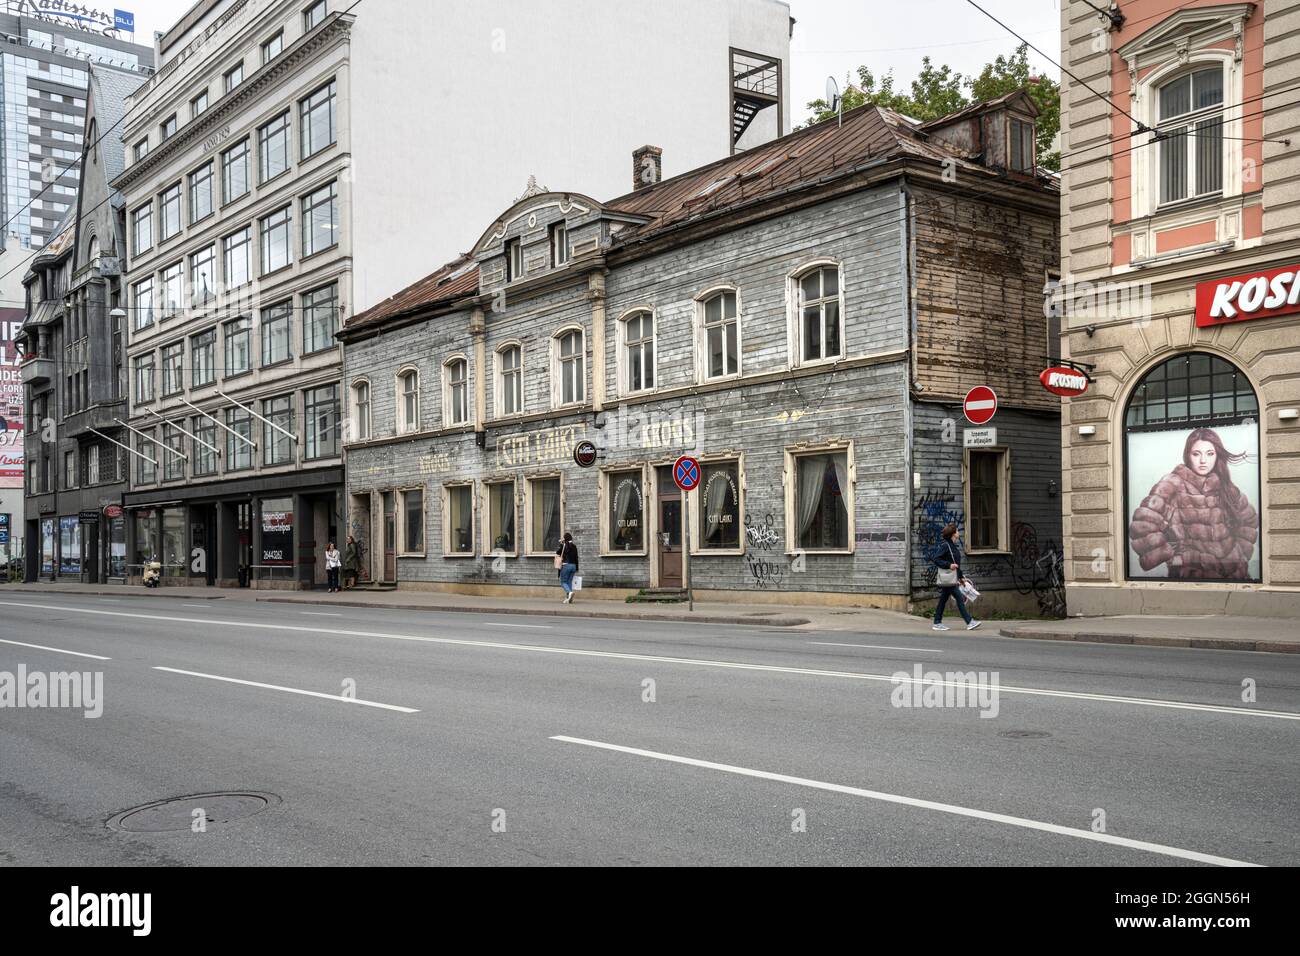 Riga, Latvia. August 2021. outdoor view of a typical wooden house in the city center Stock Photo